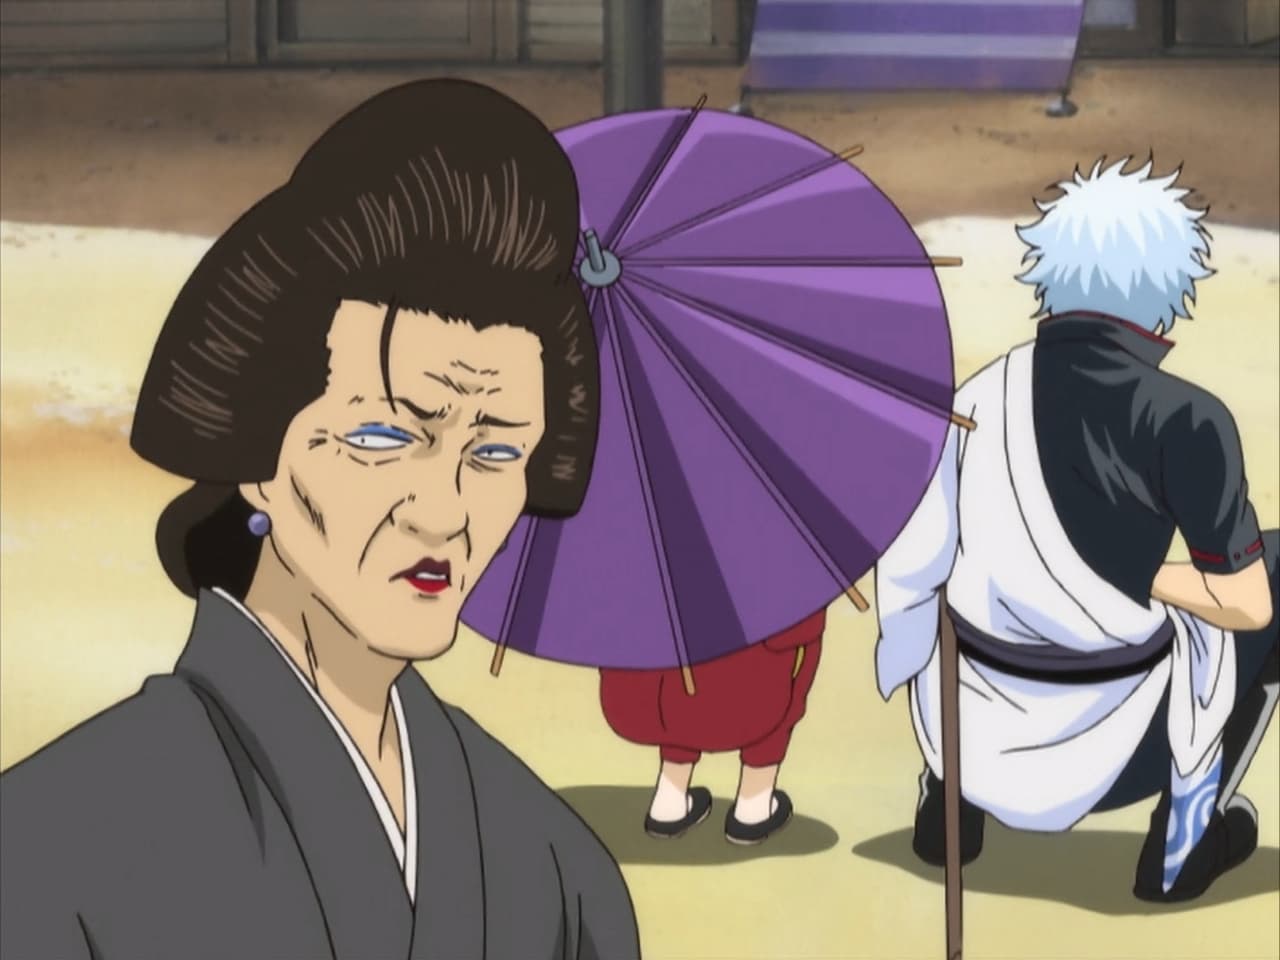 Gintama - Season 1 Episode 11 : Look, Overly Sticky Sweet Dumplings Are Not Real Dumplings, You Idiot!